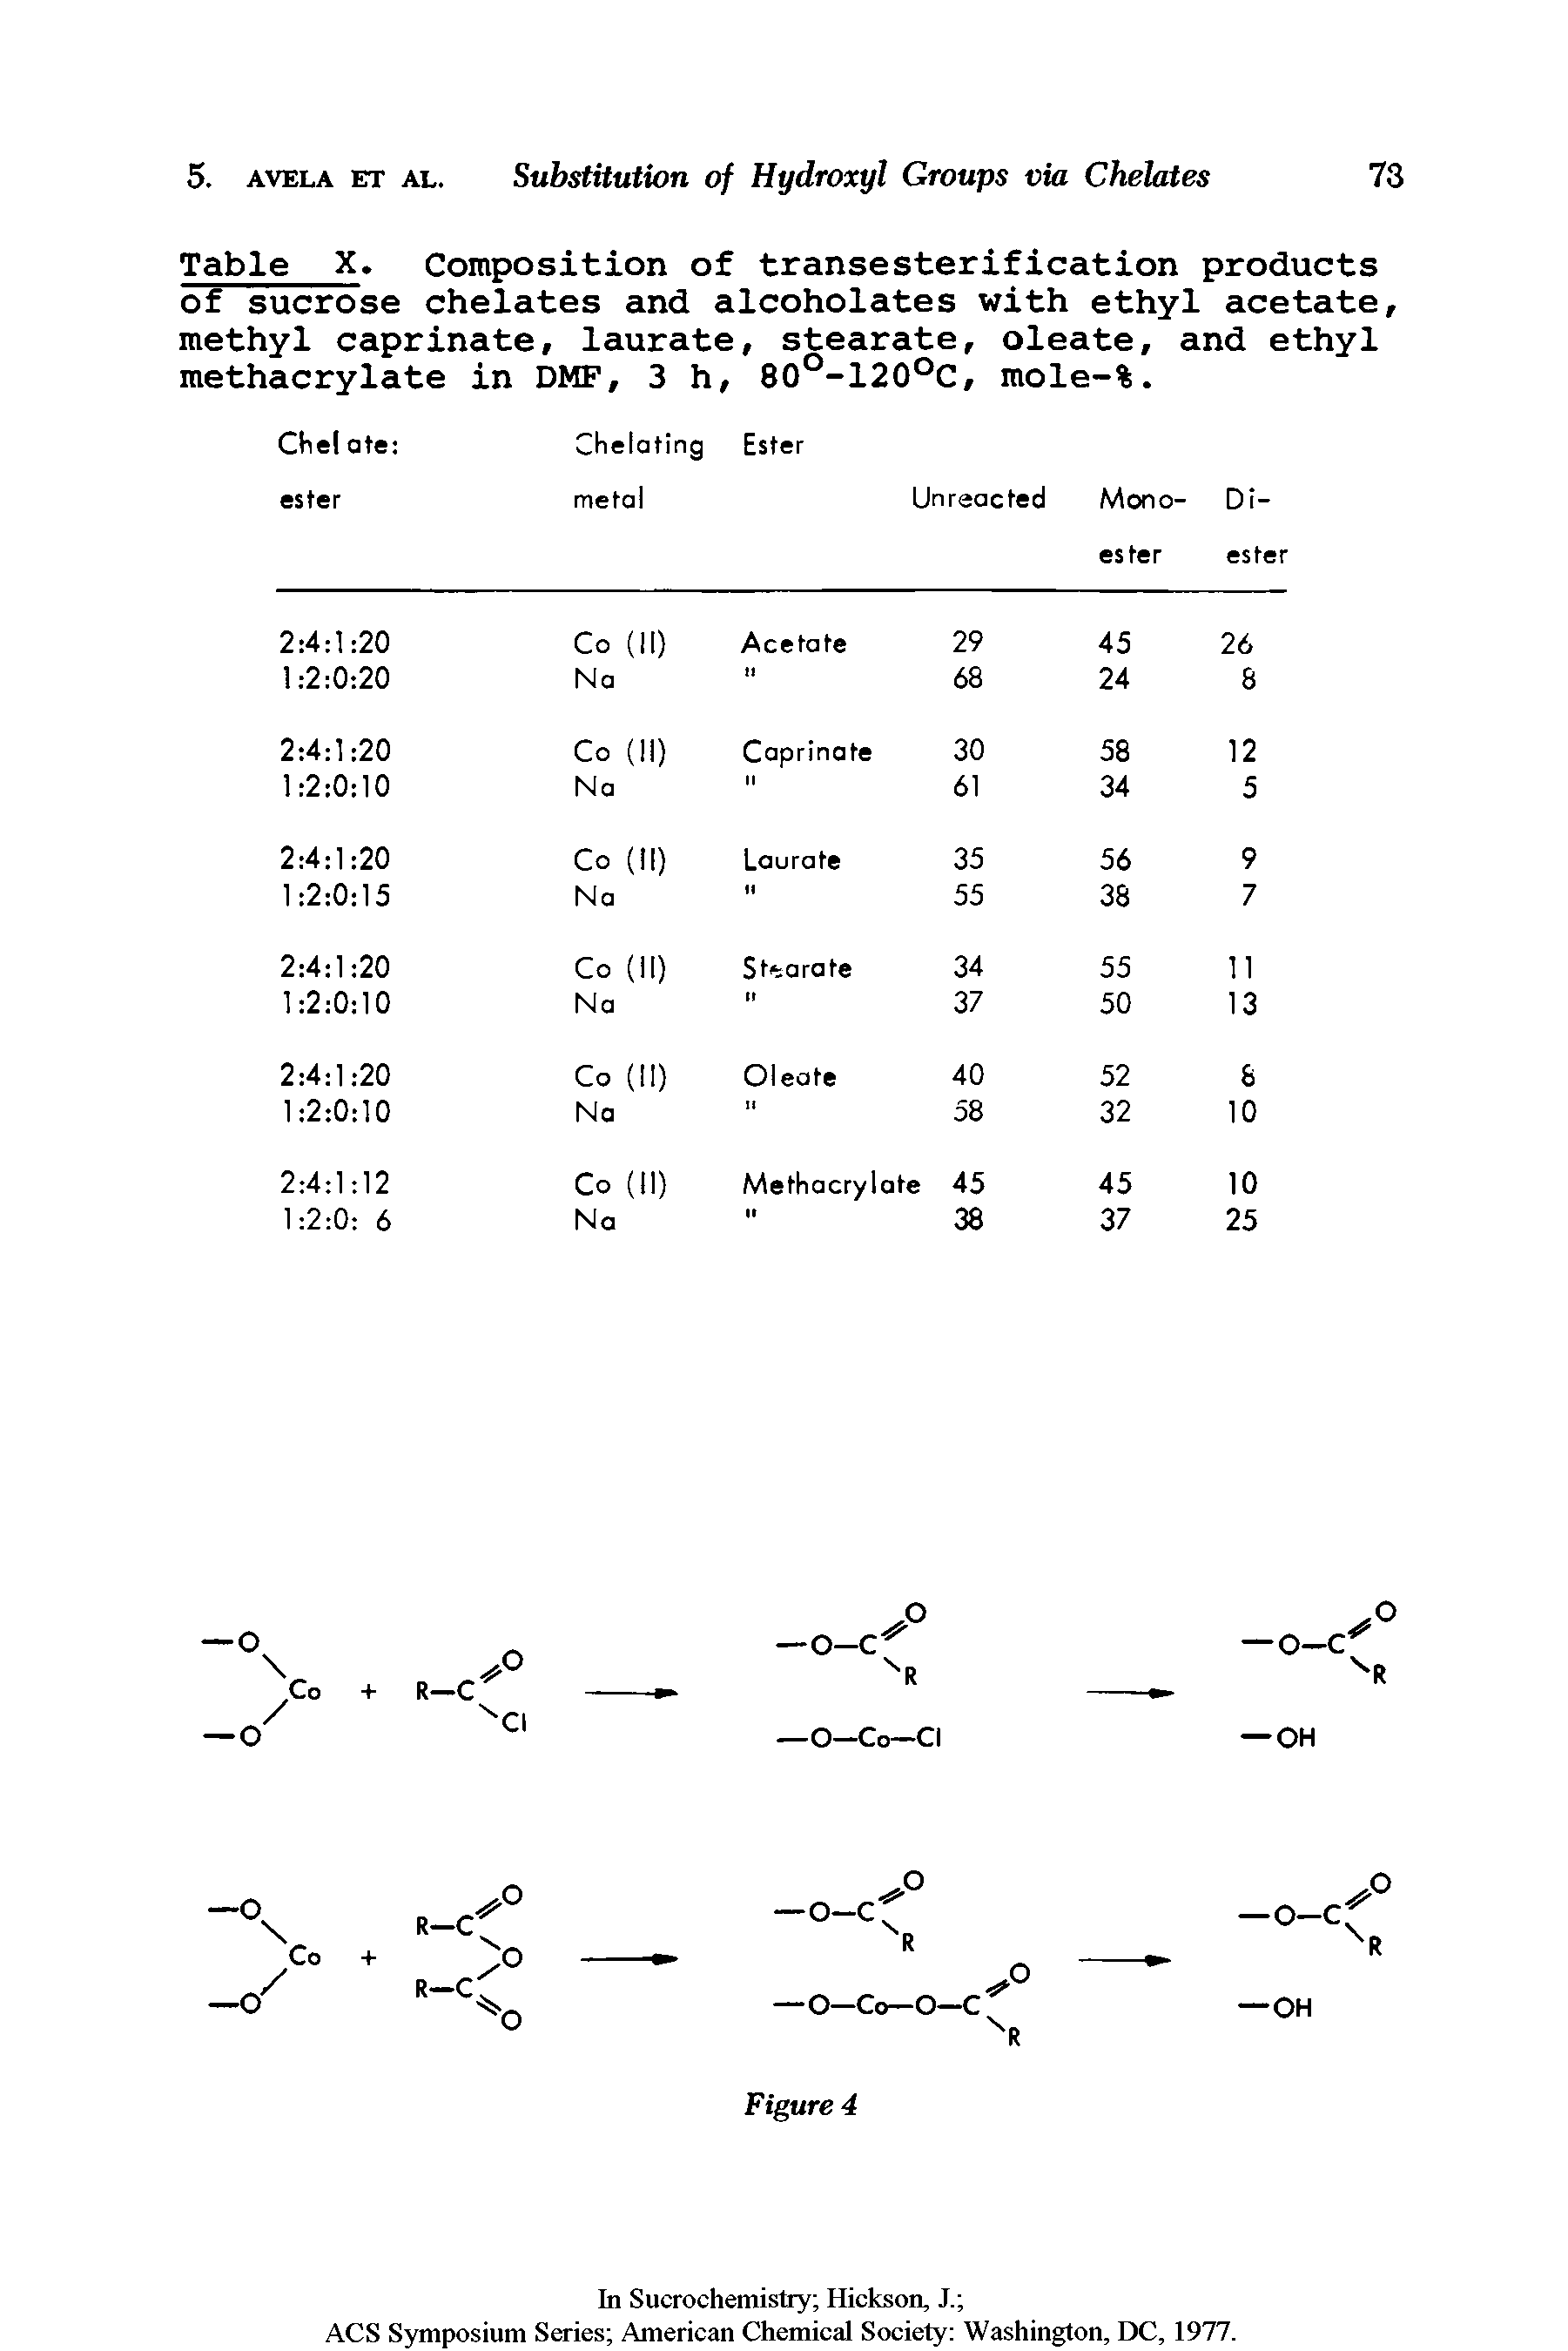 Table X. Composition of transesterification products of sucrose chelates and alcoholates with ethyl acetate, methyl caprinate, laurate, stearate, oleate, and ethyl methacrylate in DMF, 3 h, 80°-120°C, mole-%.